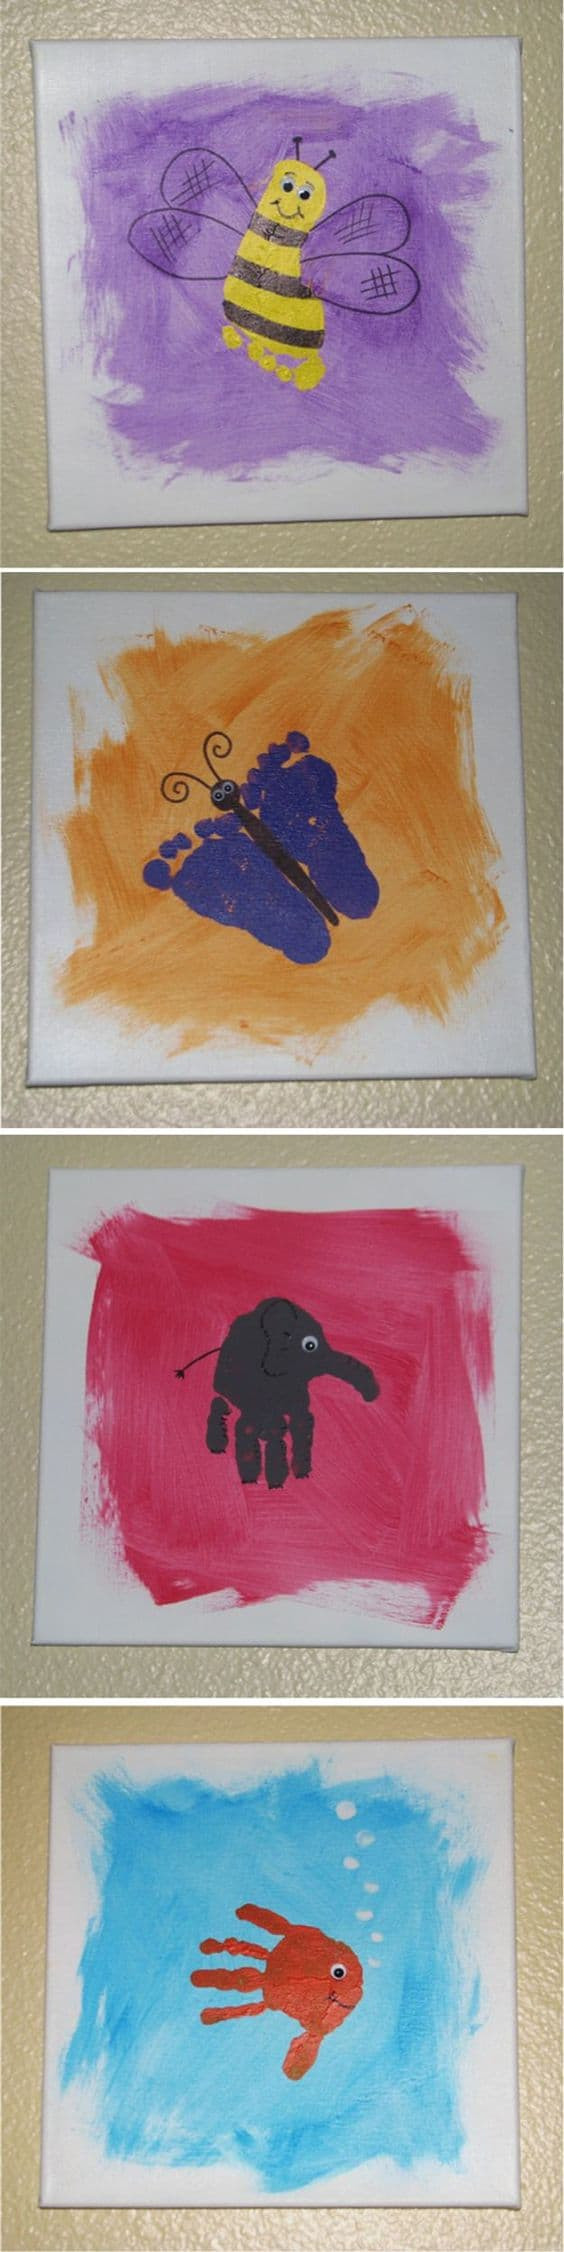 Cool Paintings For Kids
 19 Fun And Easy Painting Ideas For Kids Homesthetics